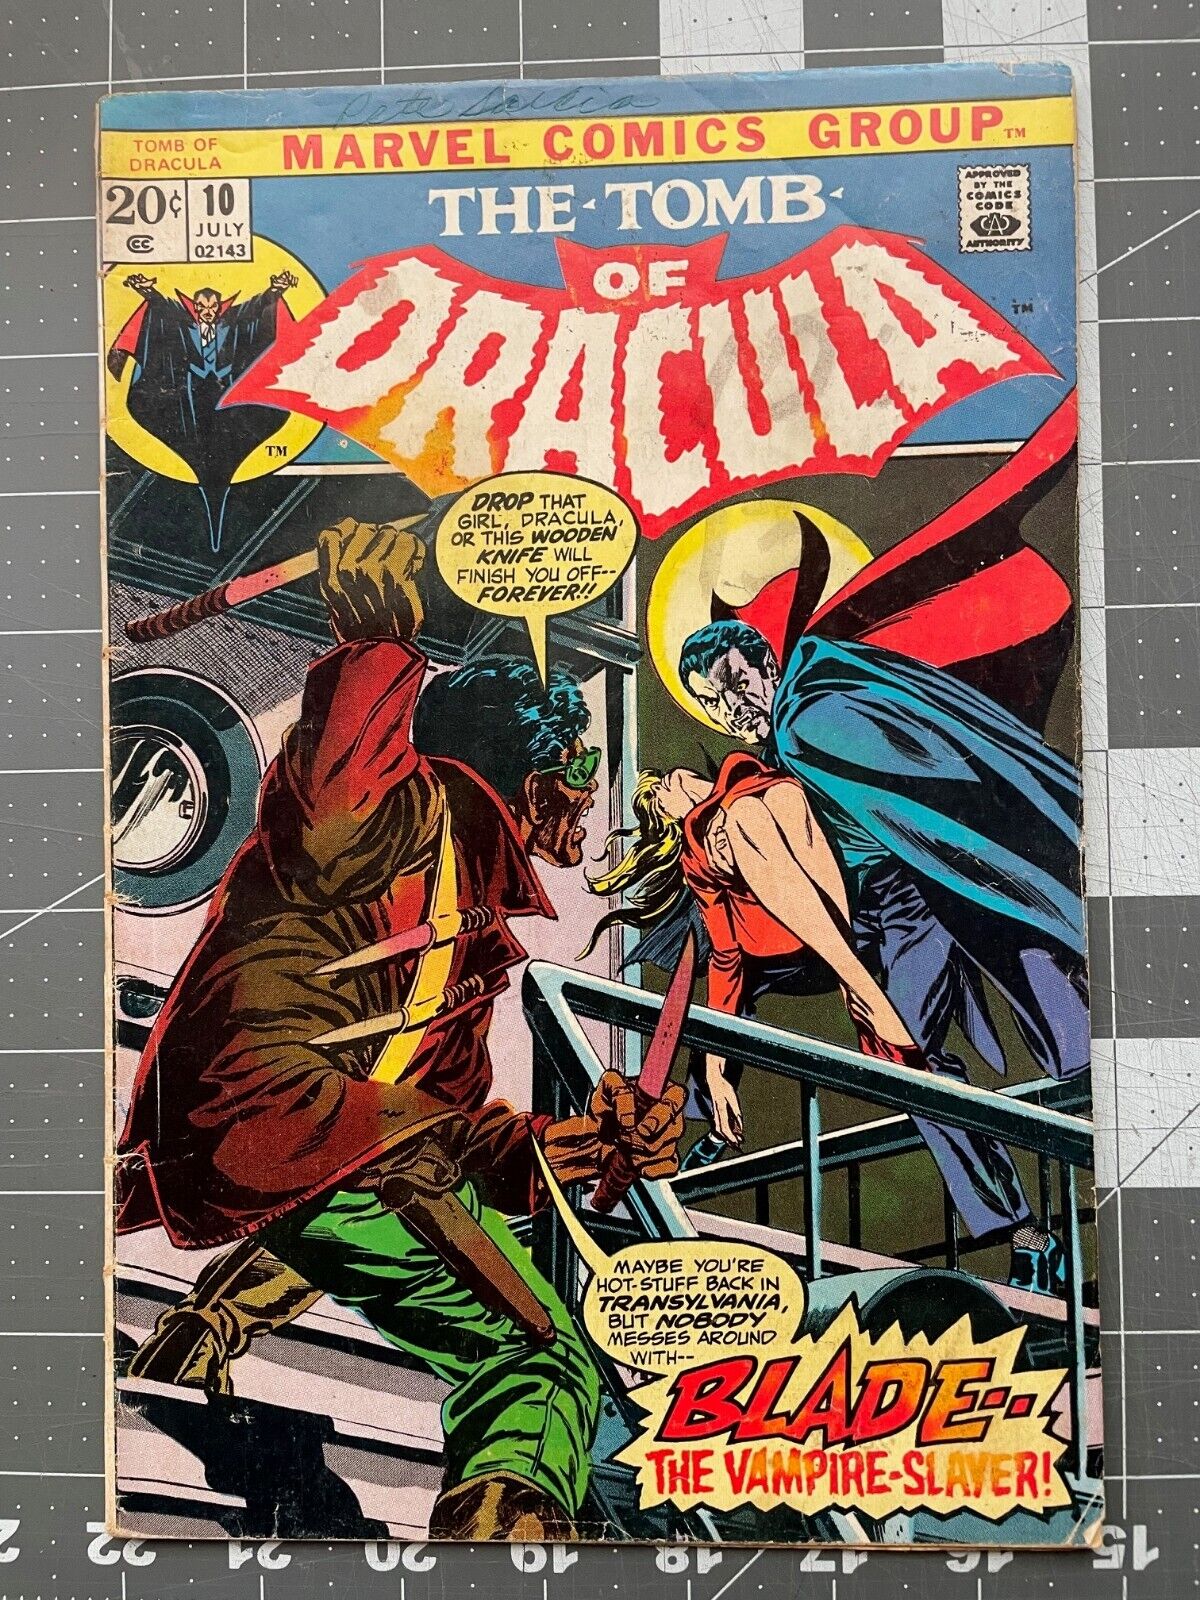 Tomb of Dracula #10 - First Appearance of Blade - 1973